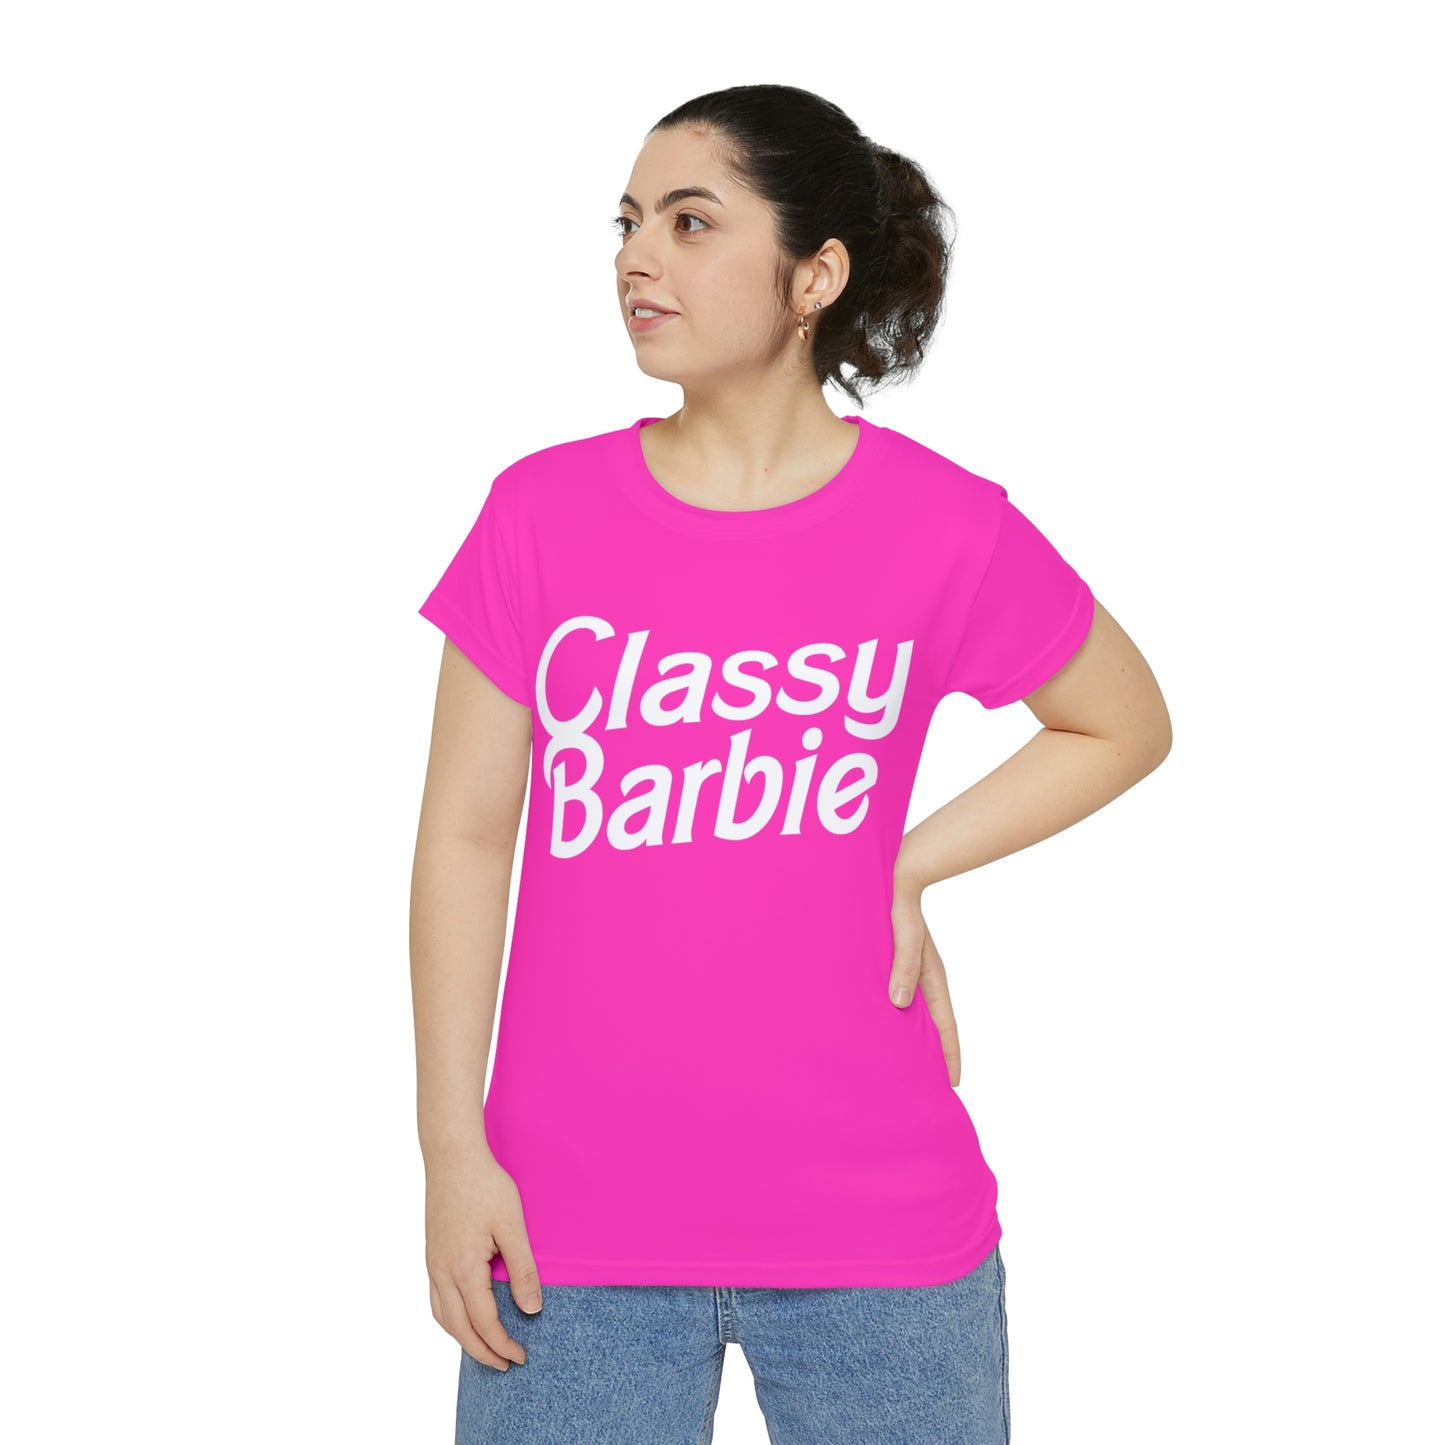 Classy Barbie, Bachelorette Party Shirts, Bridesmaid Gifts, Here comes the Party Tees, Group Party Favor Shirts, Bridal Party Shirt for women